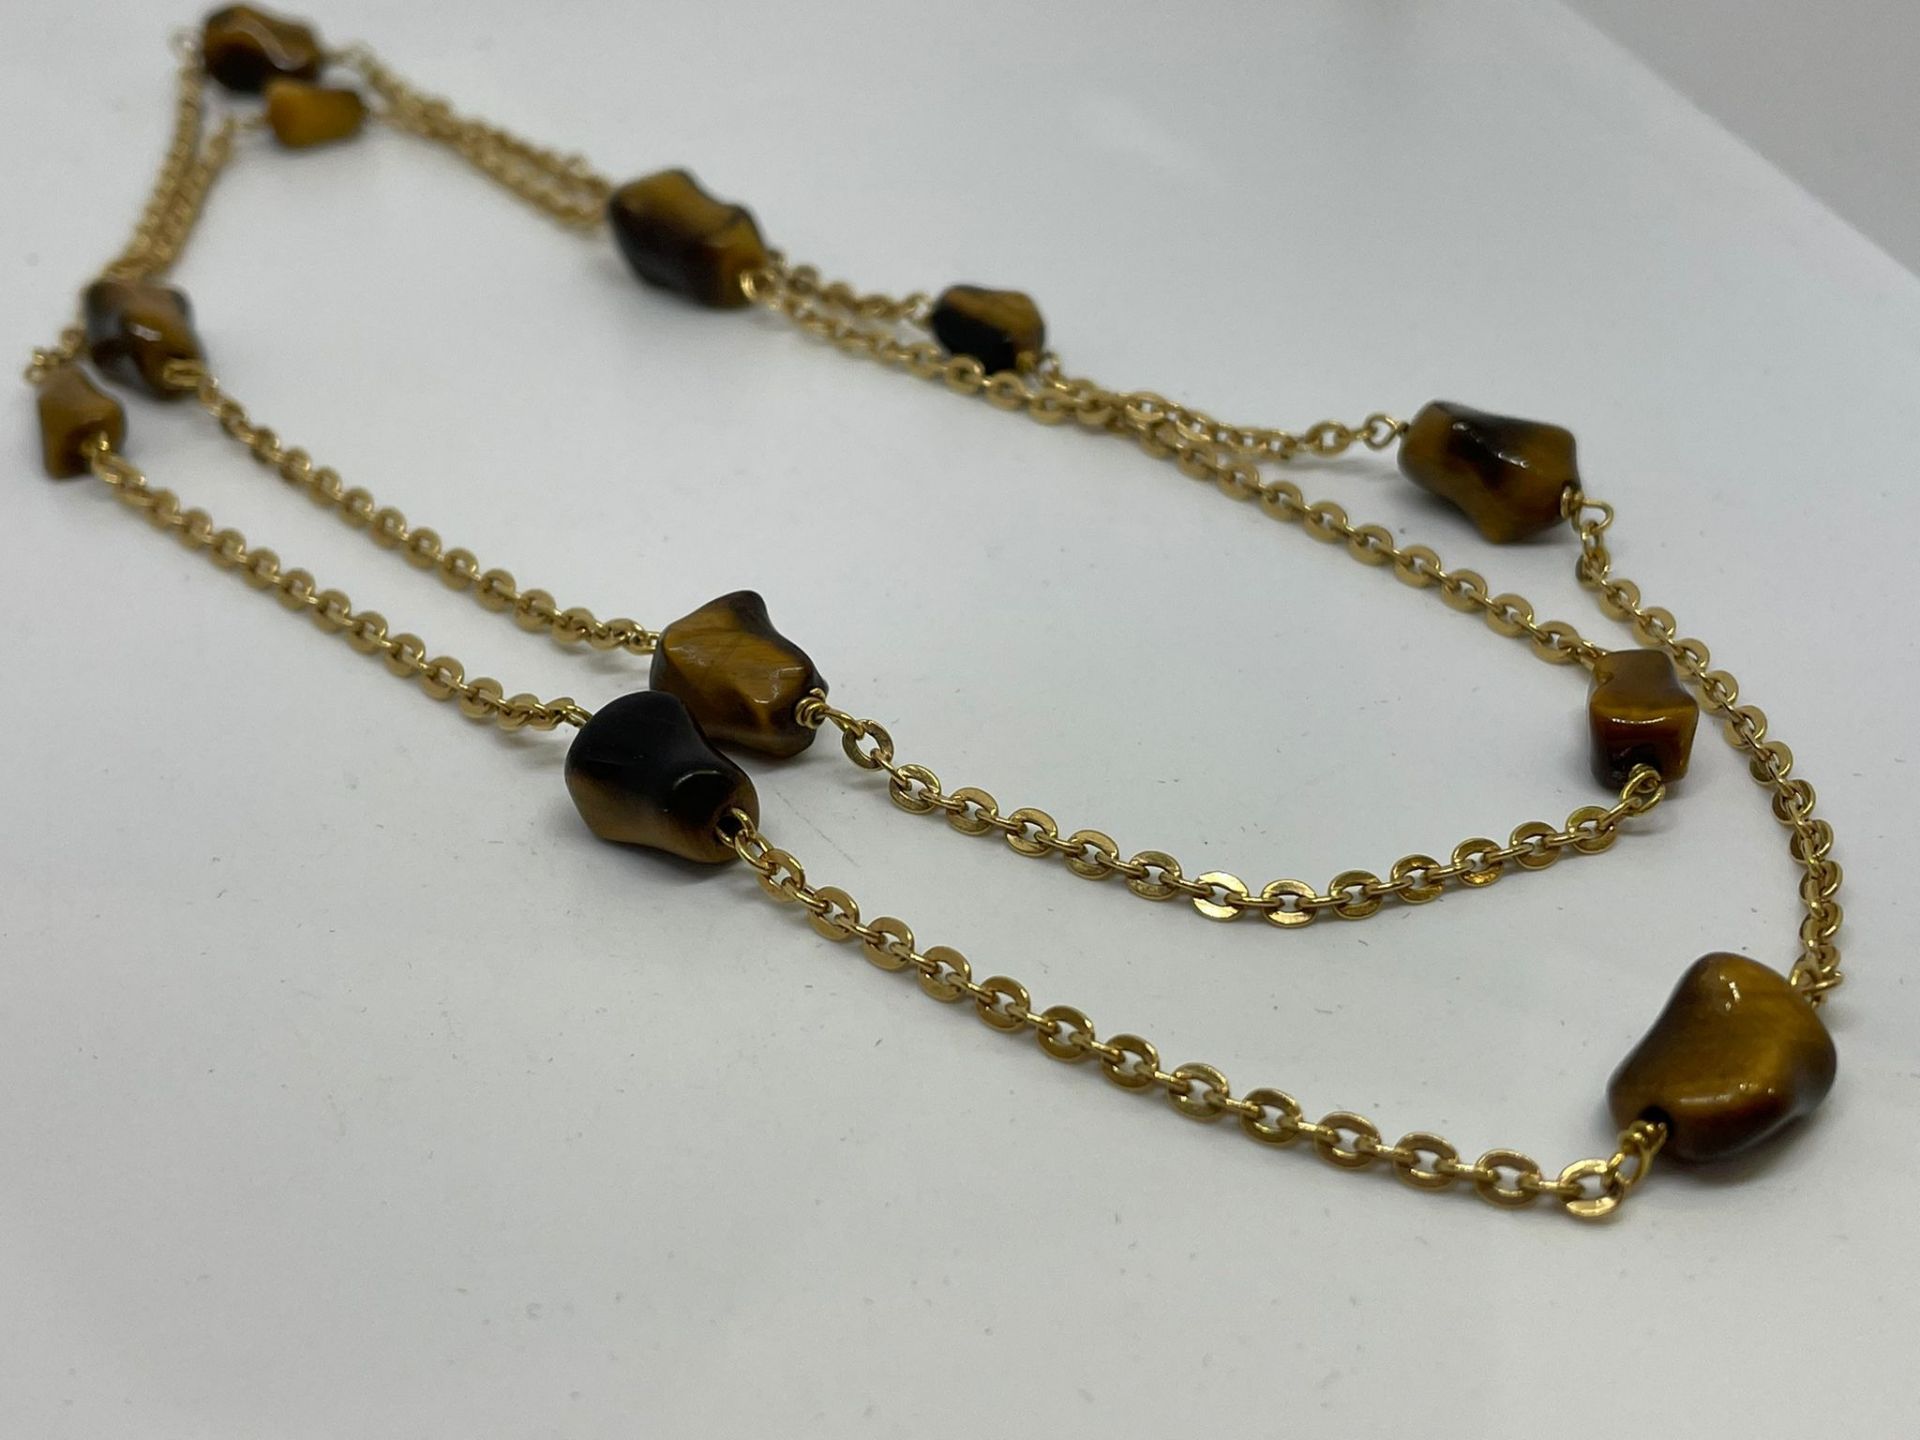 18 ct gold tigers eye necklace - Image 2 of 2